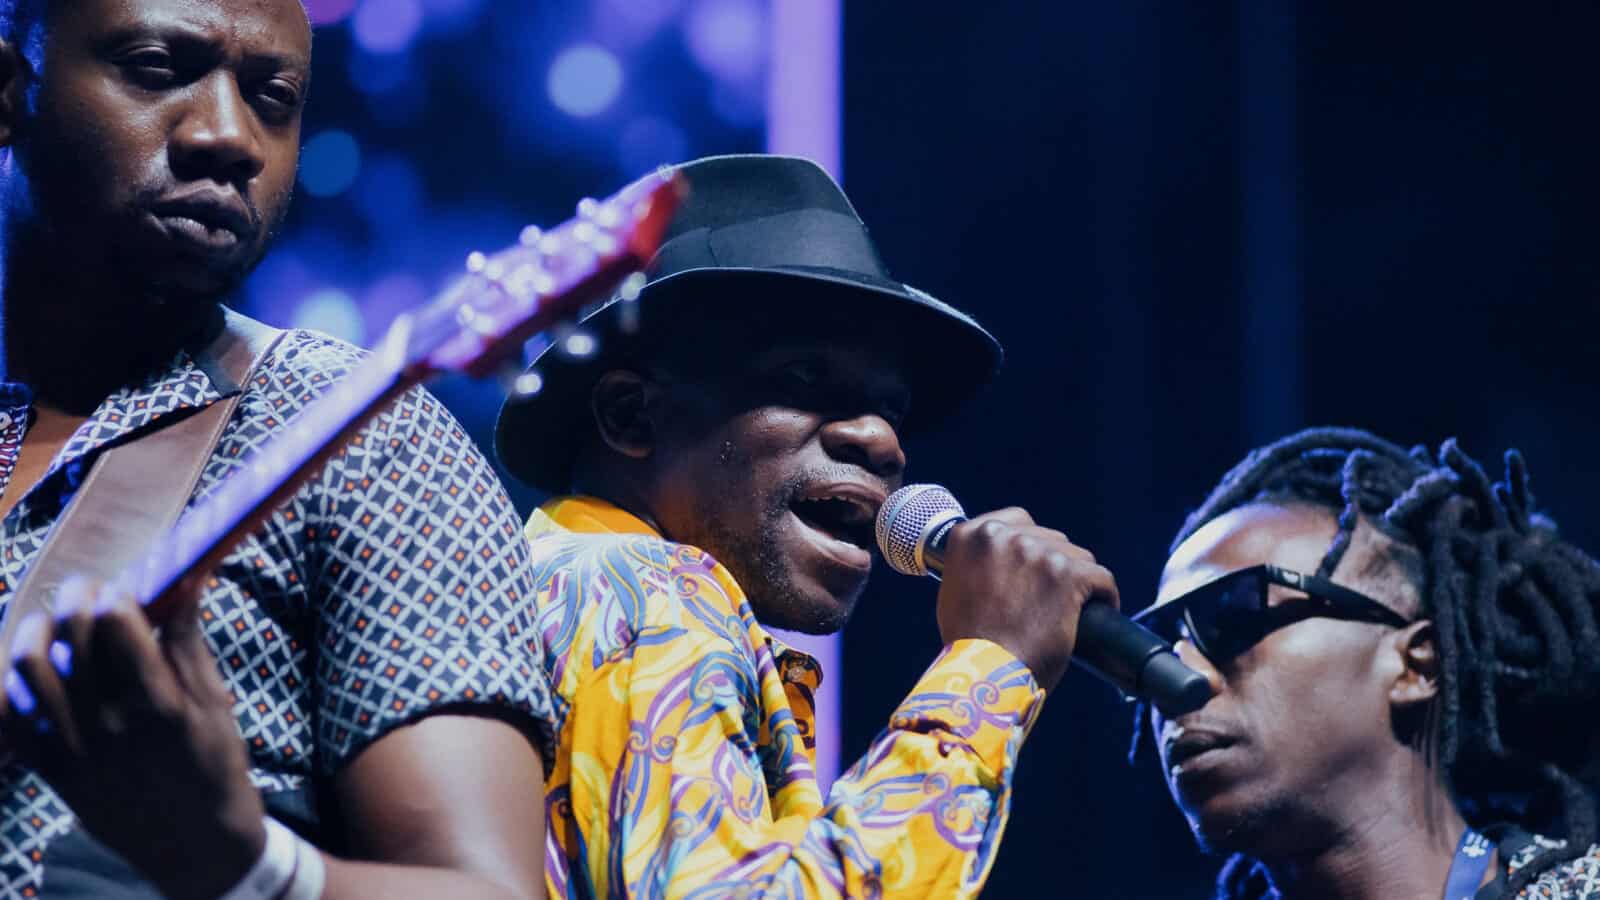 Mokoomba, an explosively talented six-man crew from the Victoria Fall, has been hailed as one of the most exciting bands from Africa in the 21st century.